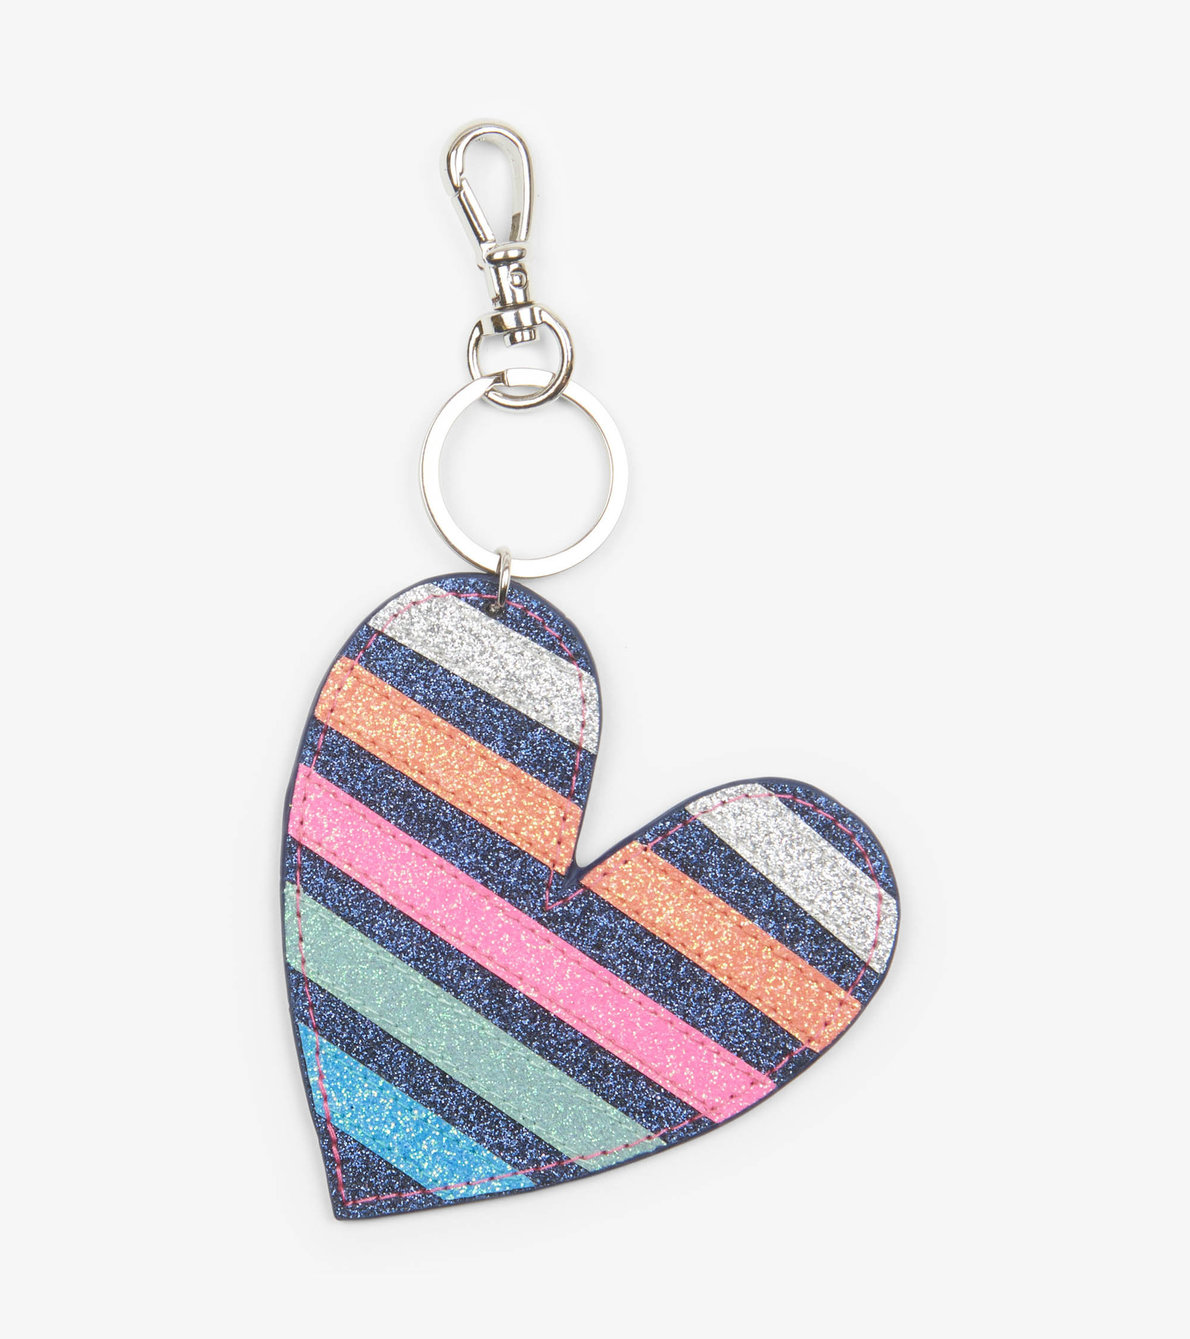 View larger image of Glistening Heart Bag Charm